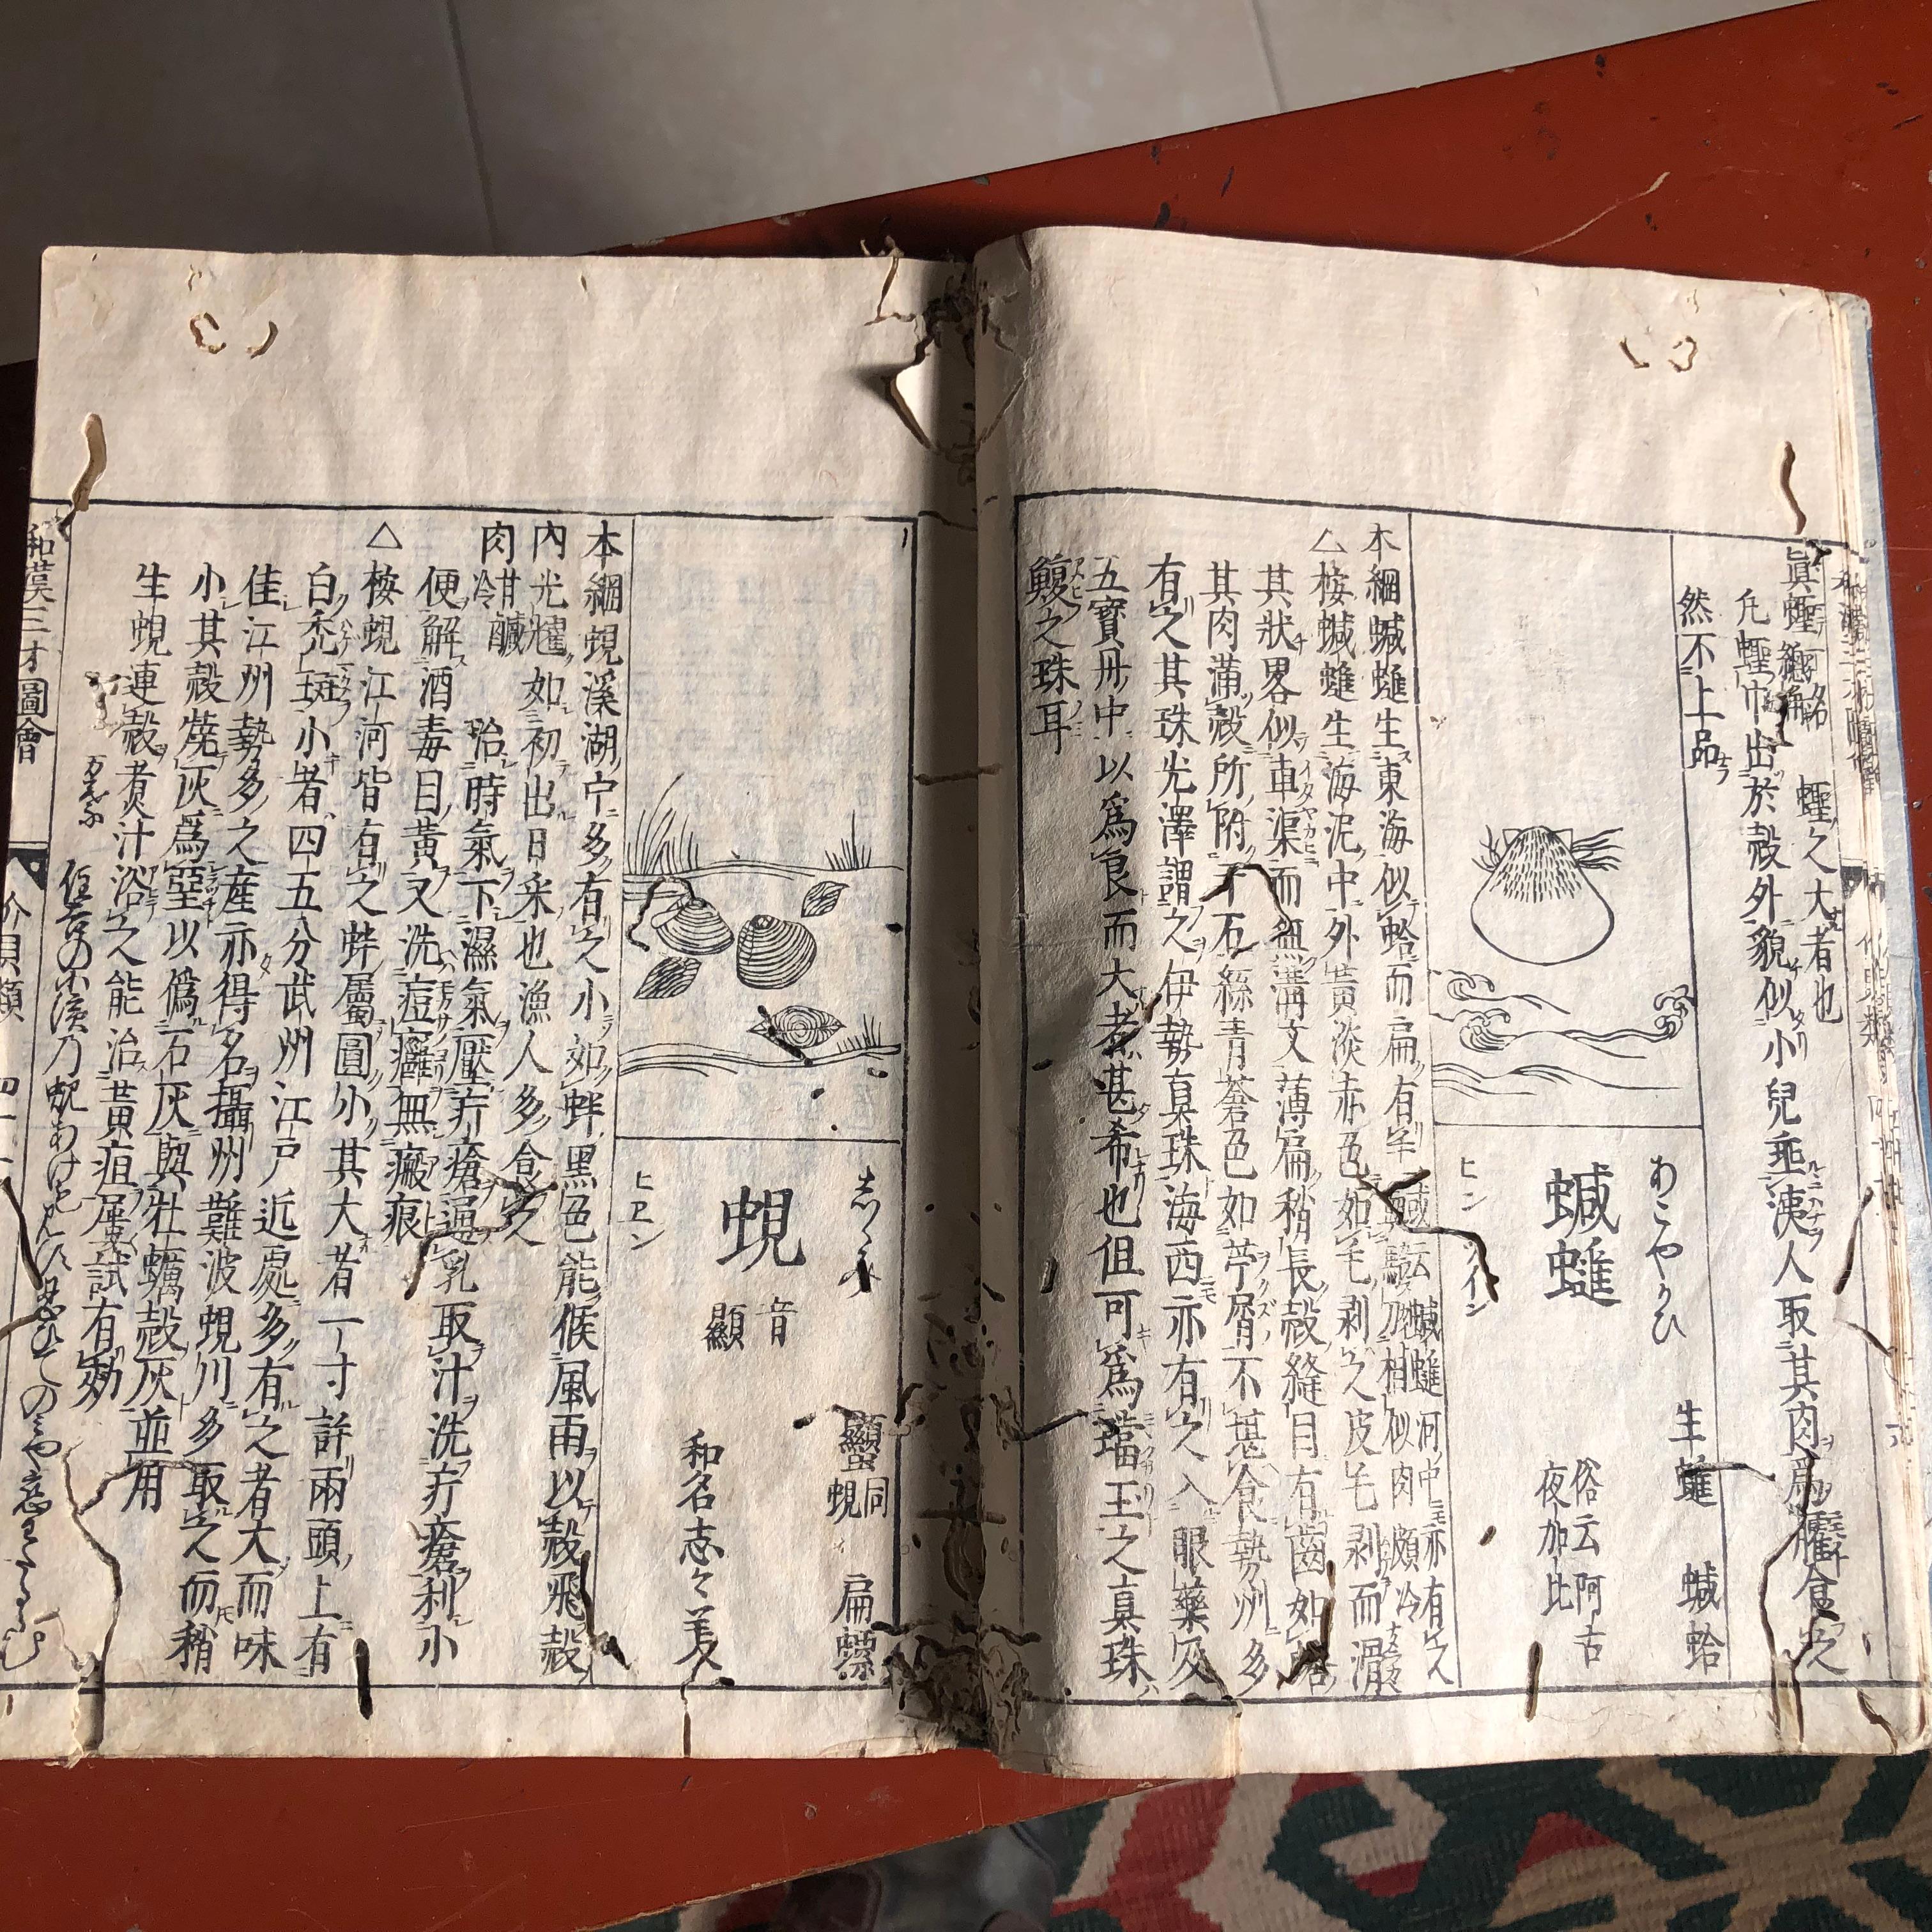 Hand-Crafted Japanese Antique Shell Fish Woodblock Guide Book Dated 1712, Rare Edition